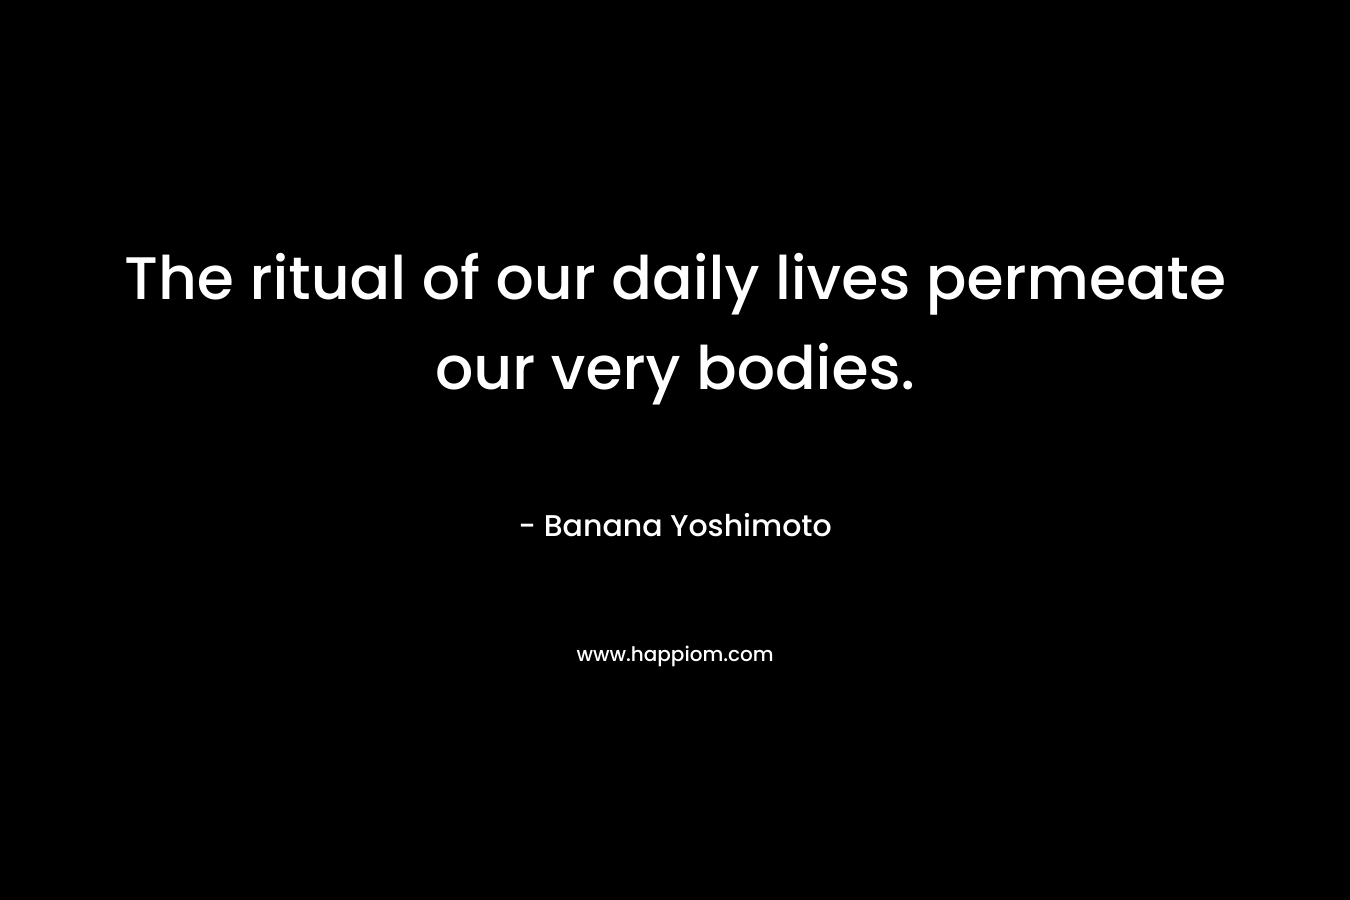 The ritual of our daily lives permeate our very bodies.